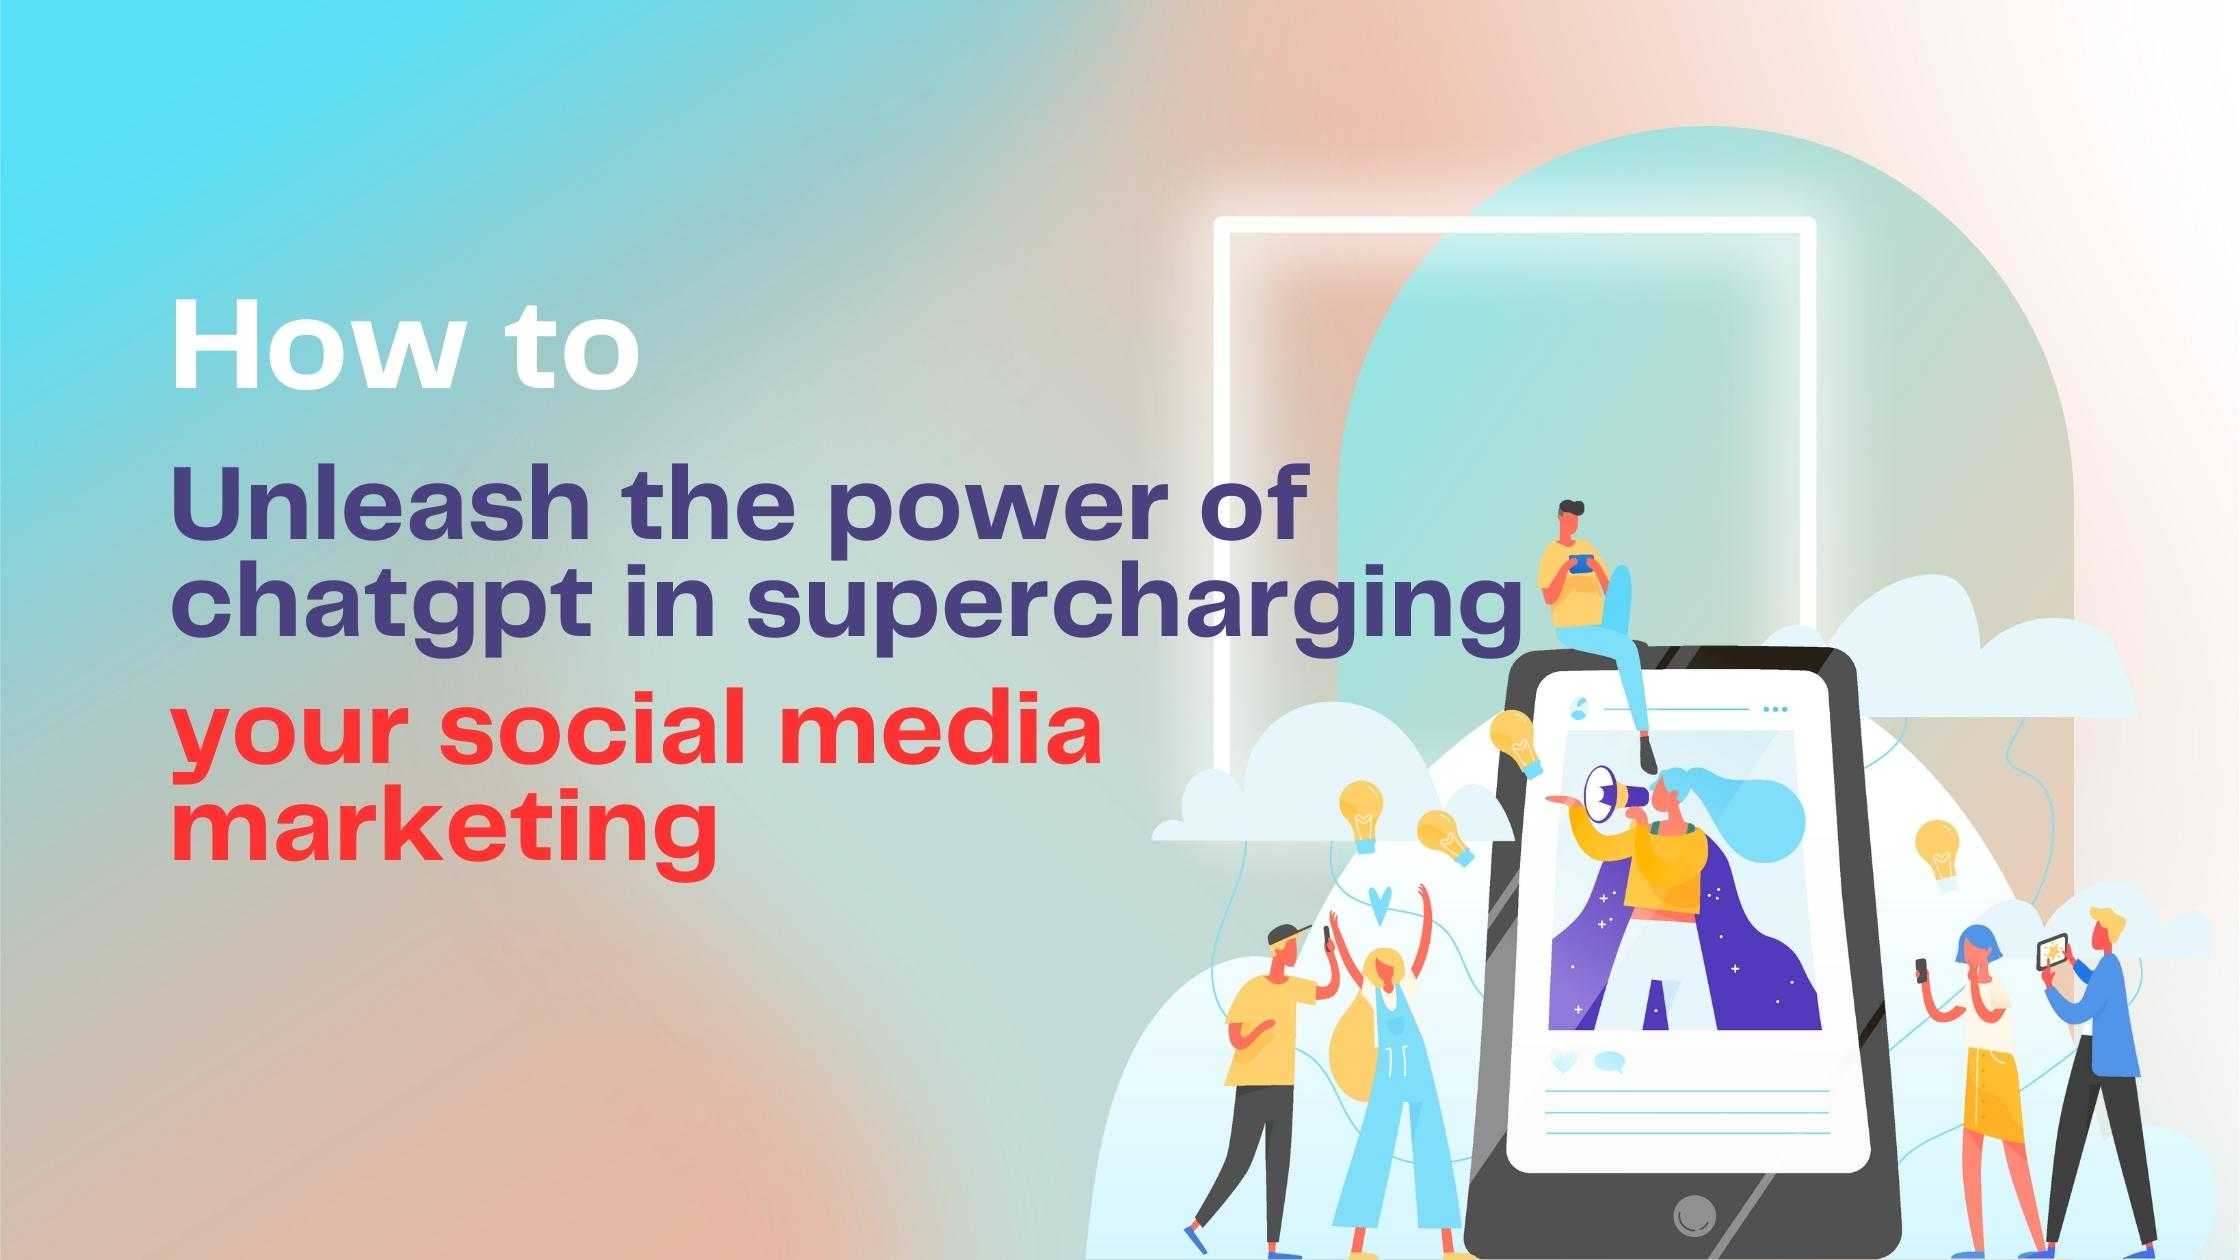 How to Unleash the power of chatgpt in supercharging your social media marketing